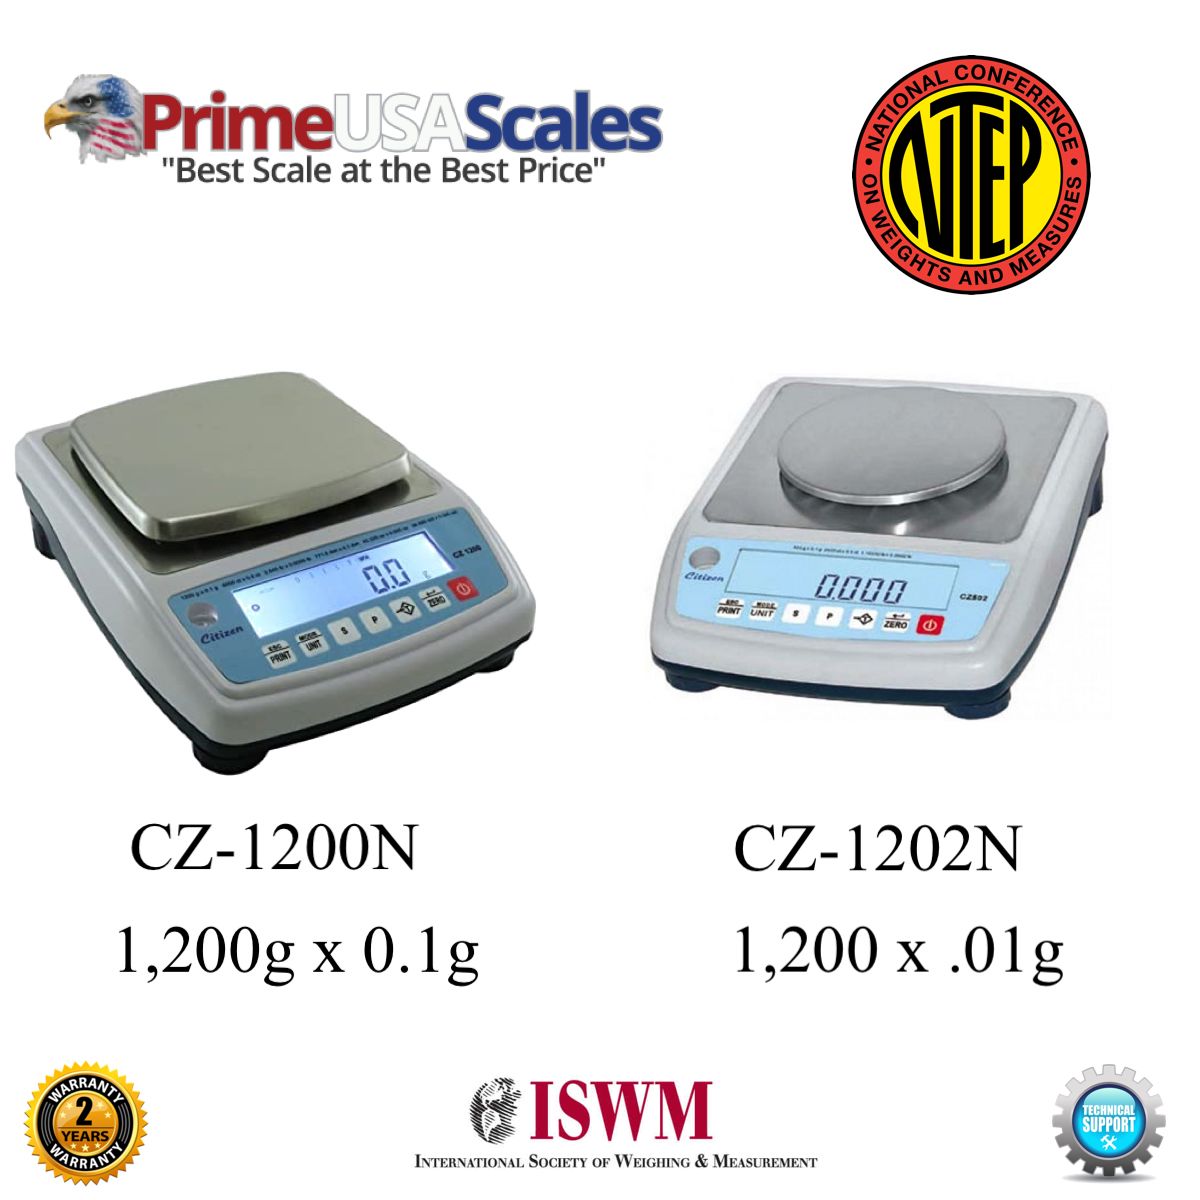 CZ-1200N & CZ-1202N Balance Scales (Legal for Trade) - Prime USA Scales